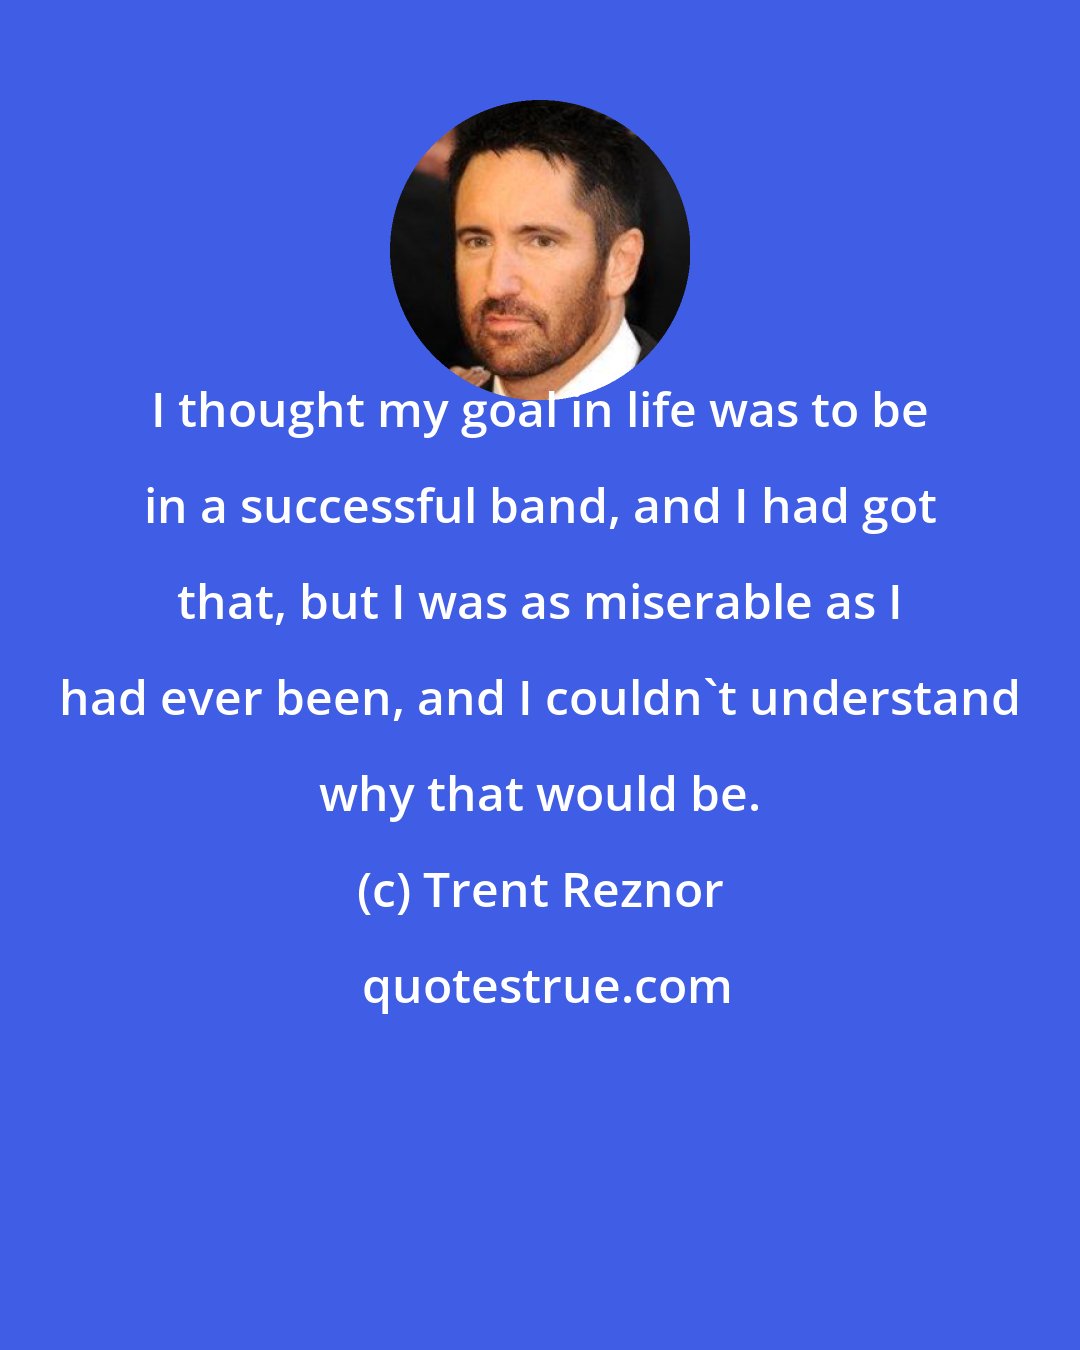 Trent Reznor: I thought my goal in life was to be in a successful band, and I had got that, but I was as miserable as I had ever been, and I couldn't understand why that would be.